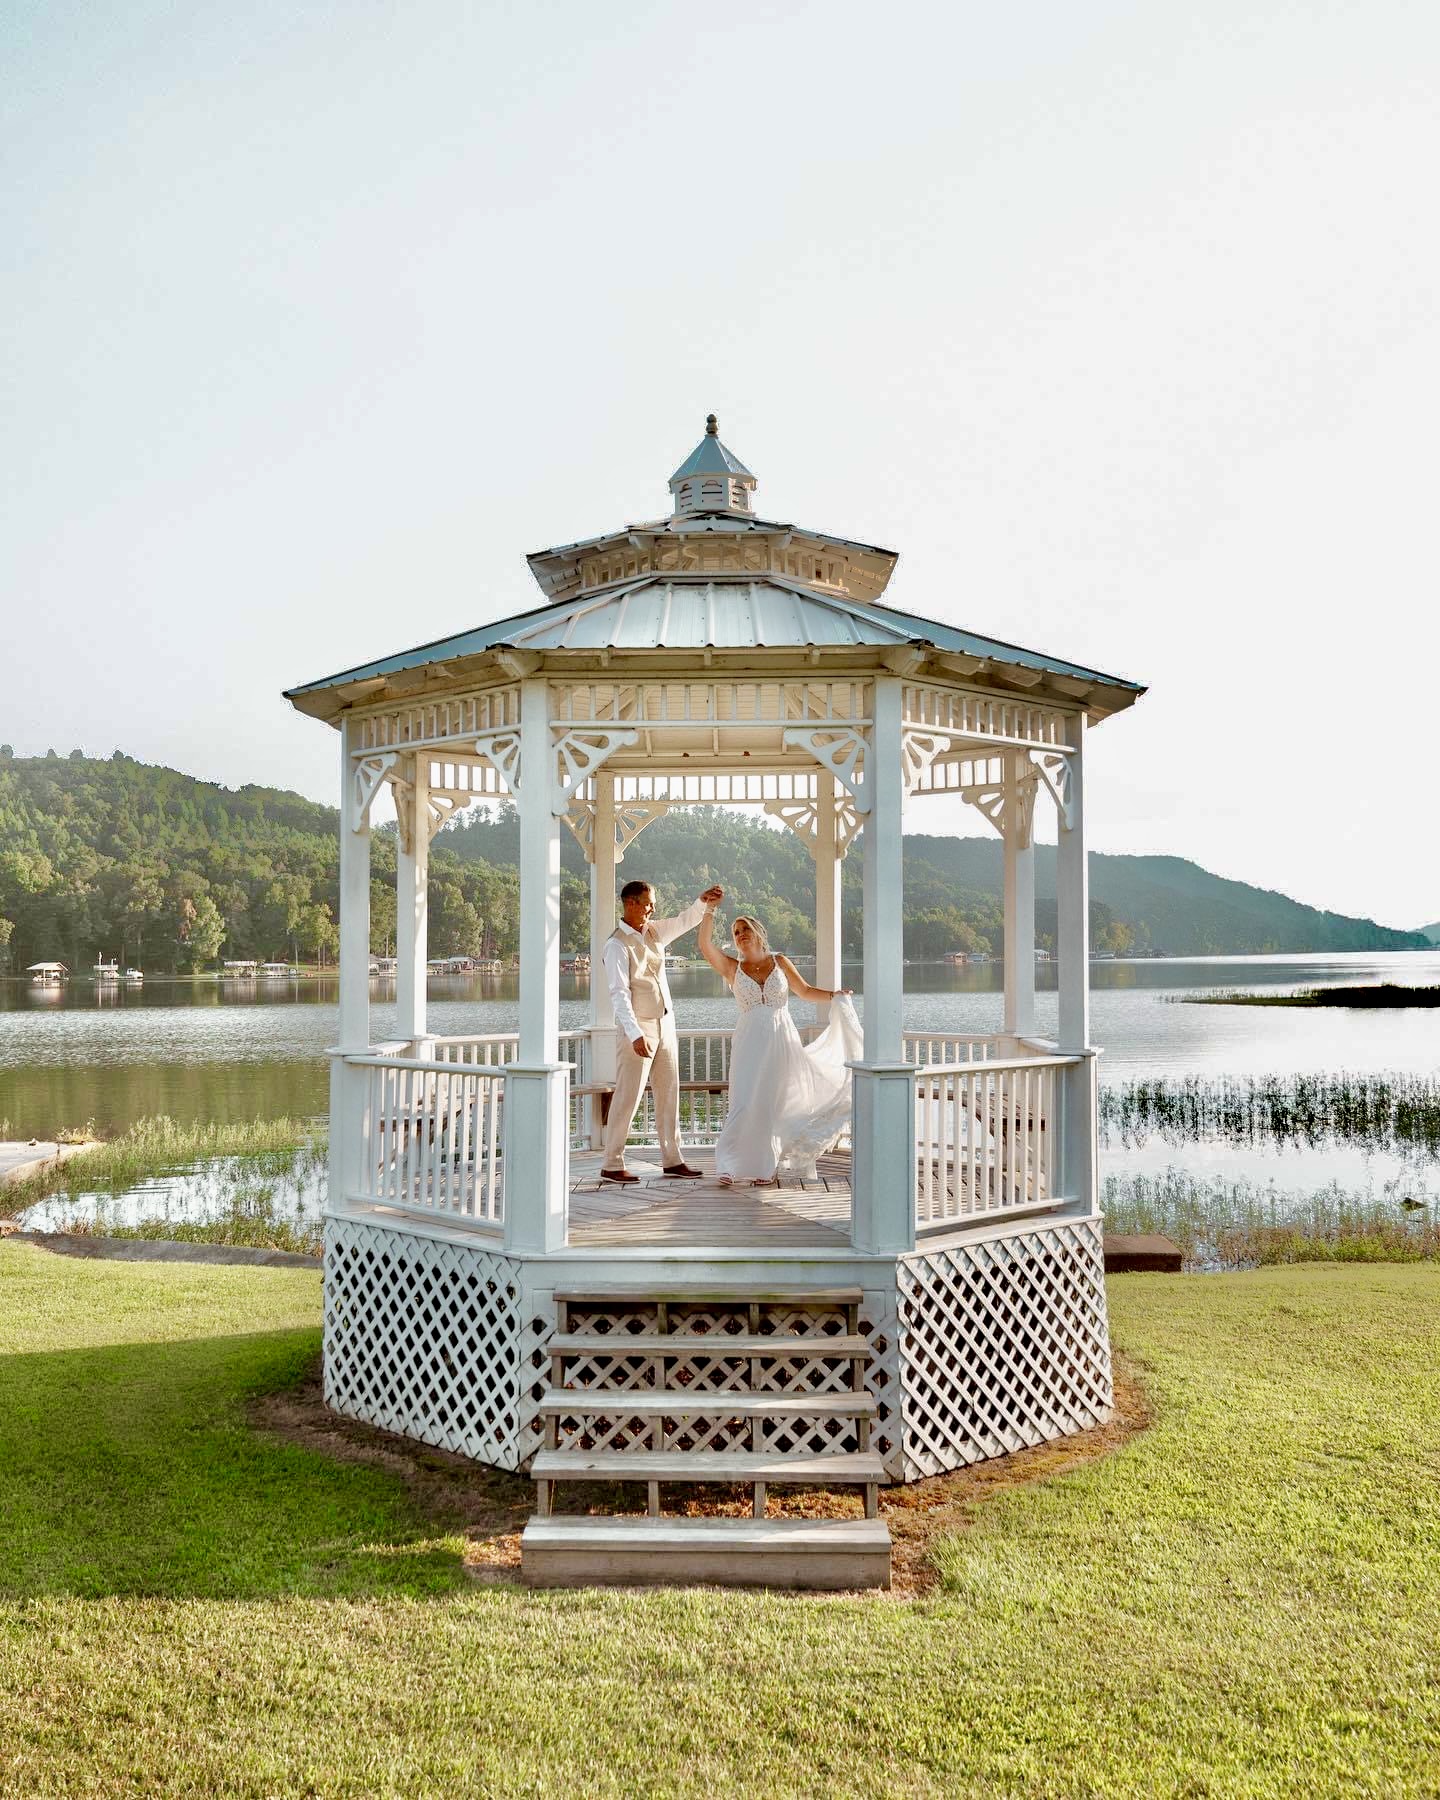 The gazebo down by the water is a really popular spot for pictures, nothing but water and hills in the background.. can't get much better than that. Love this spot!